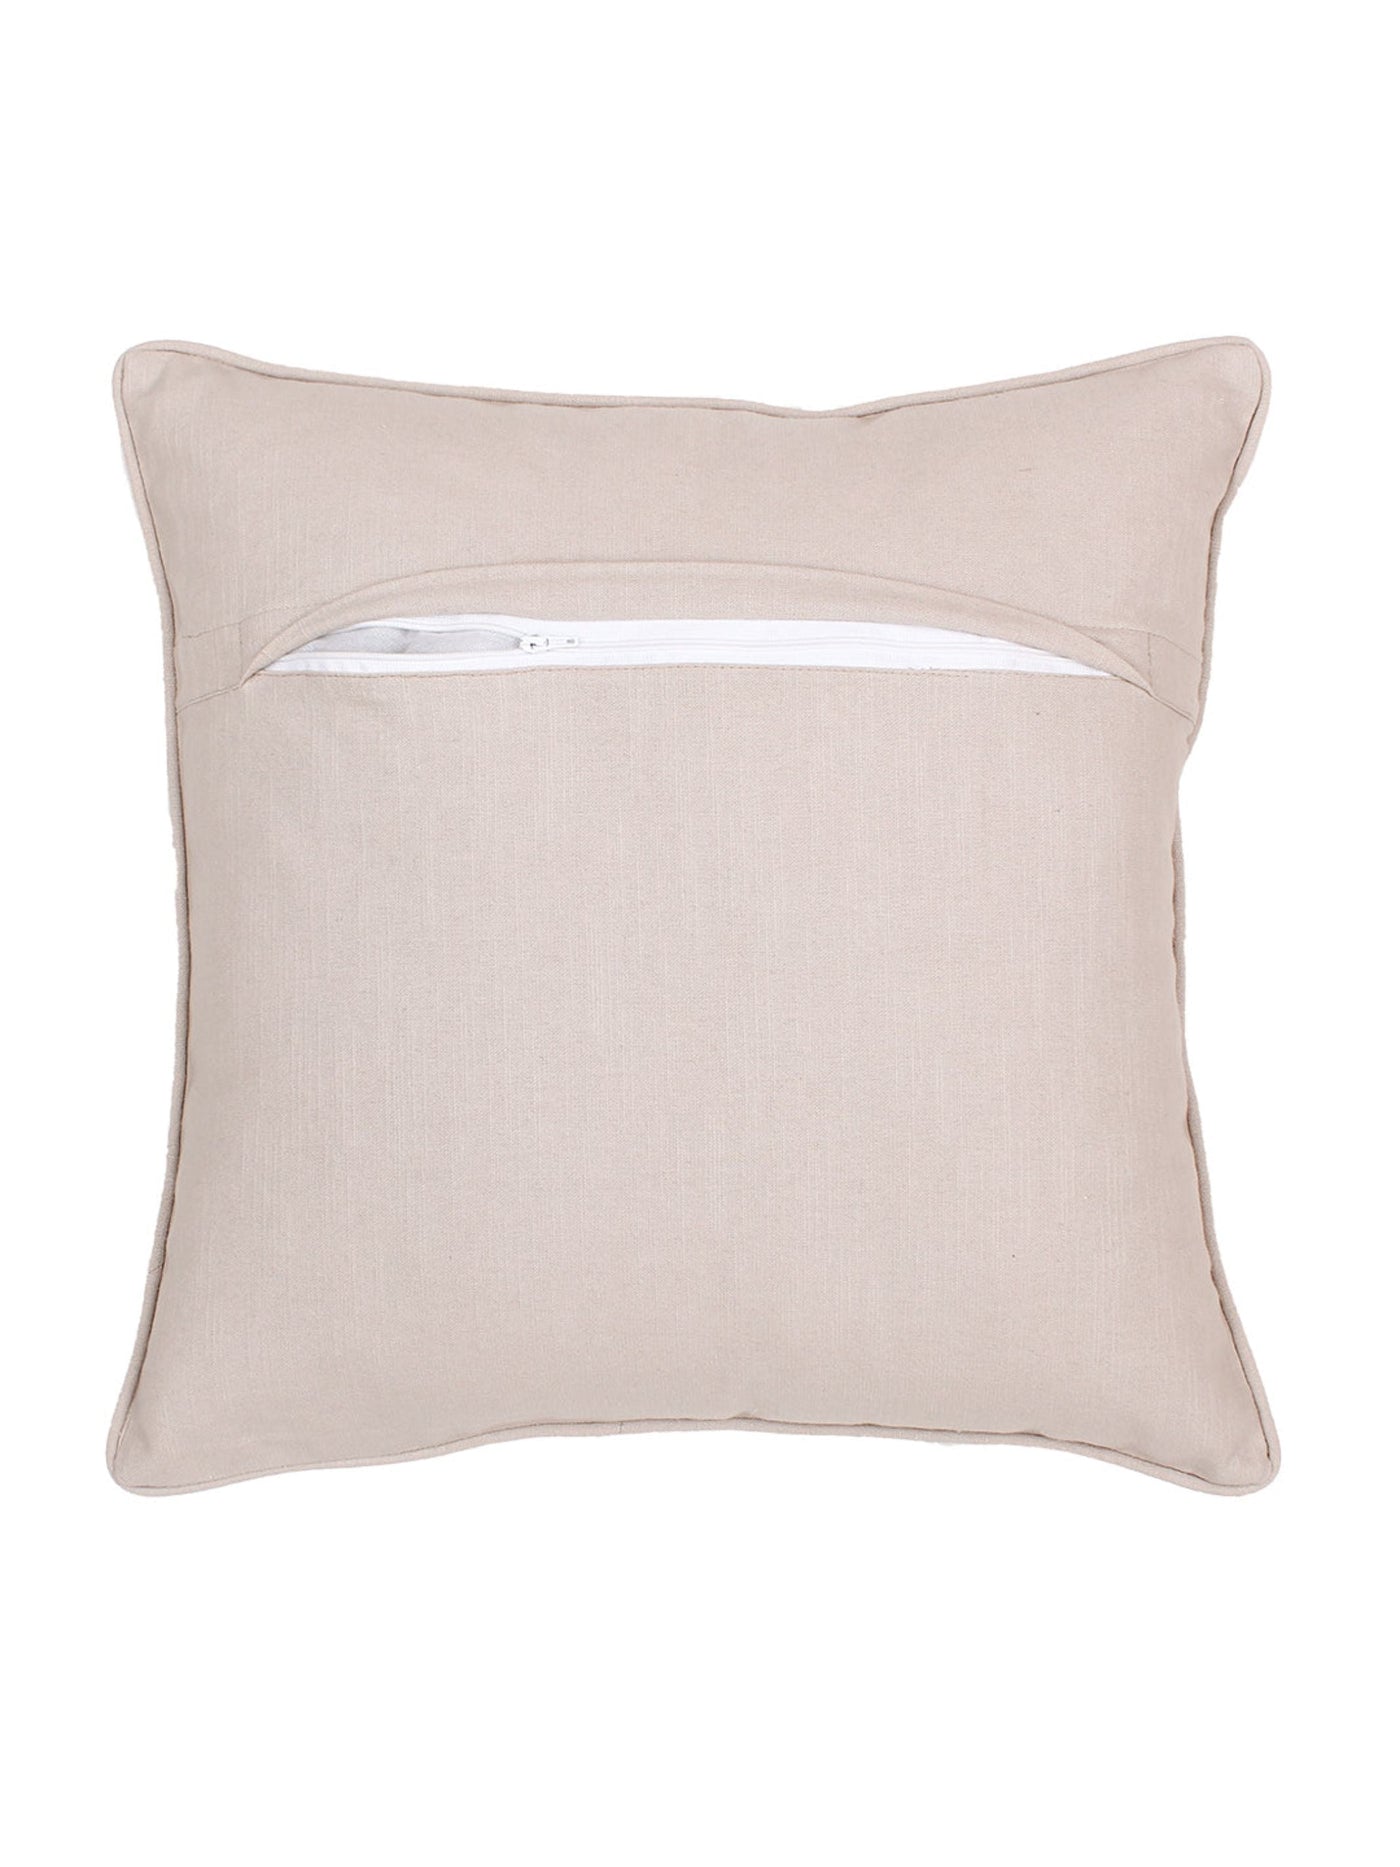 Purvanchal Cushion Cover (Gold/Grey)